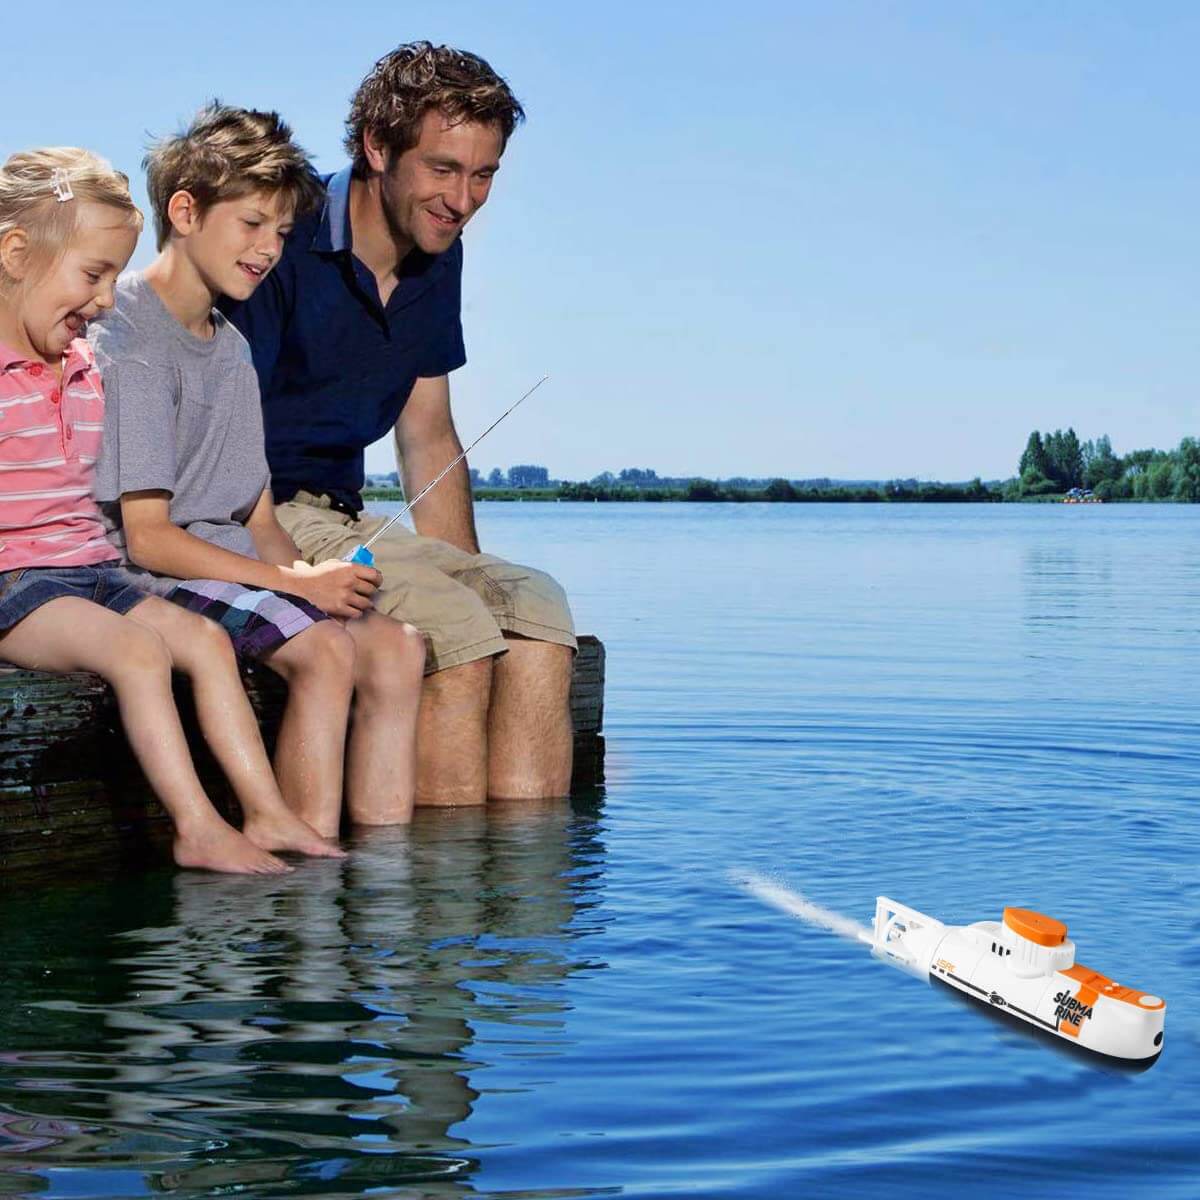 Mini Remote Control Submarine Waterproof Diving Toy 6 Channels Boat for Boys and Girls